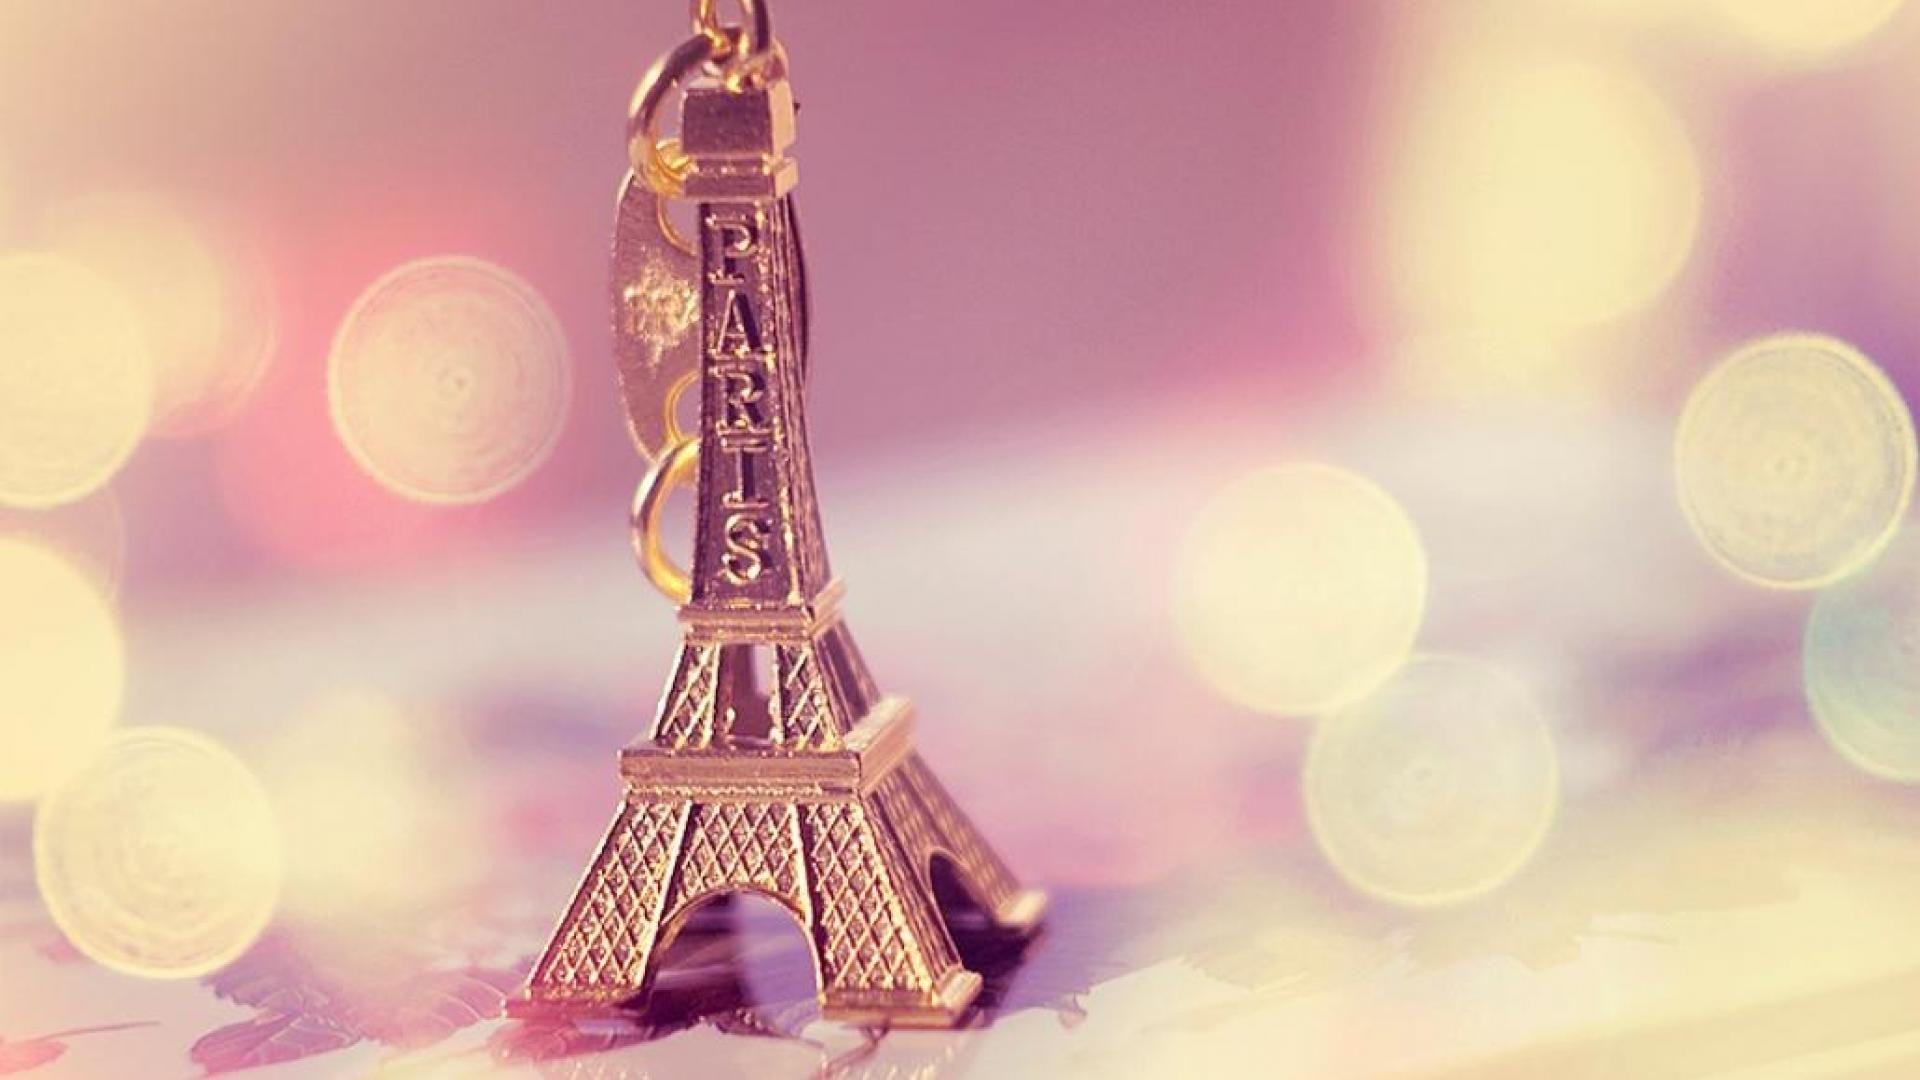 HD Paris Background: The City Of Lights And Romance